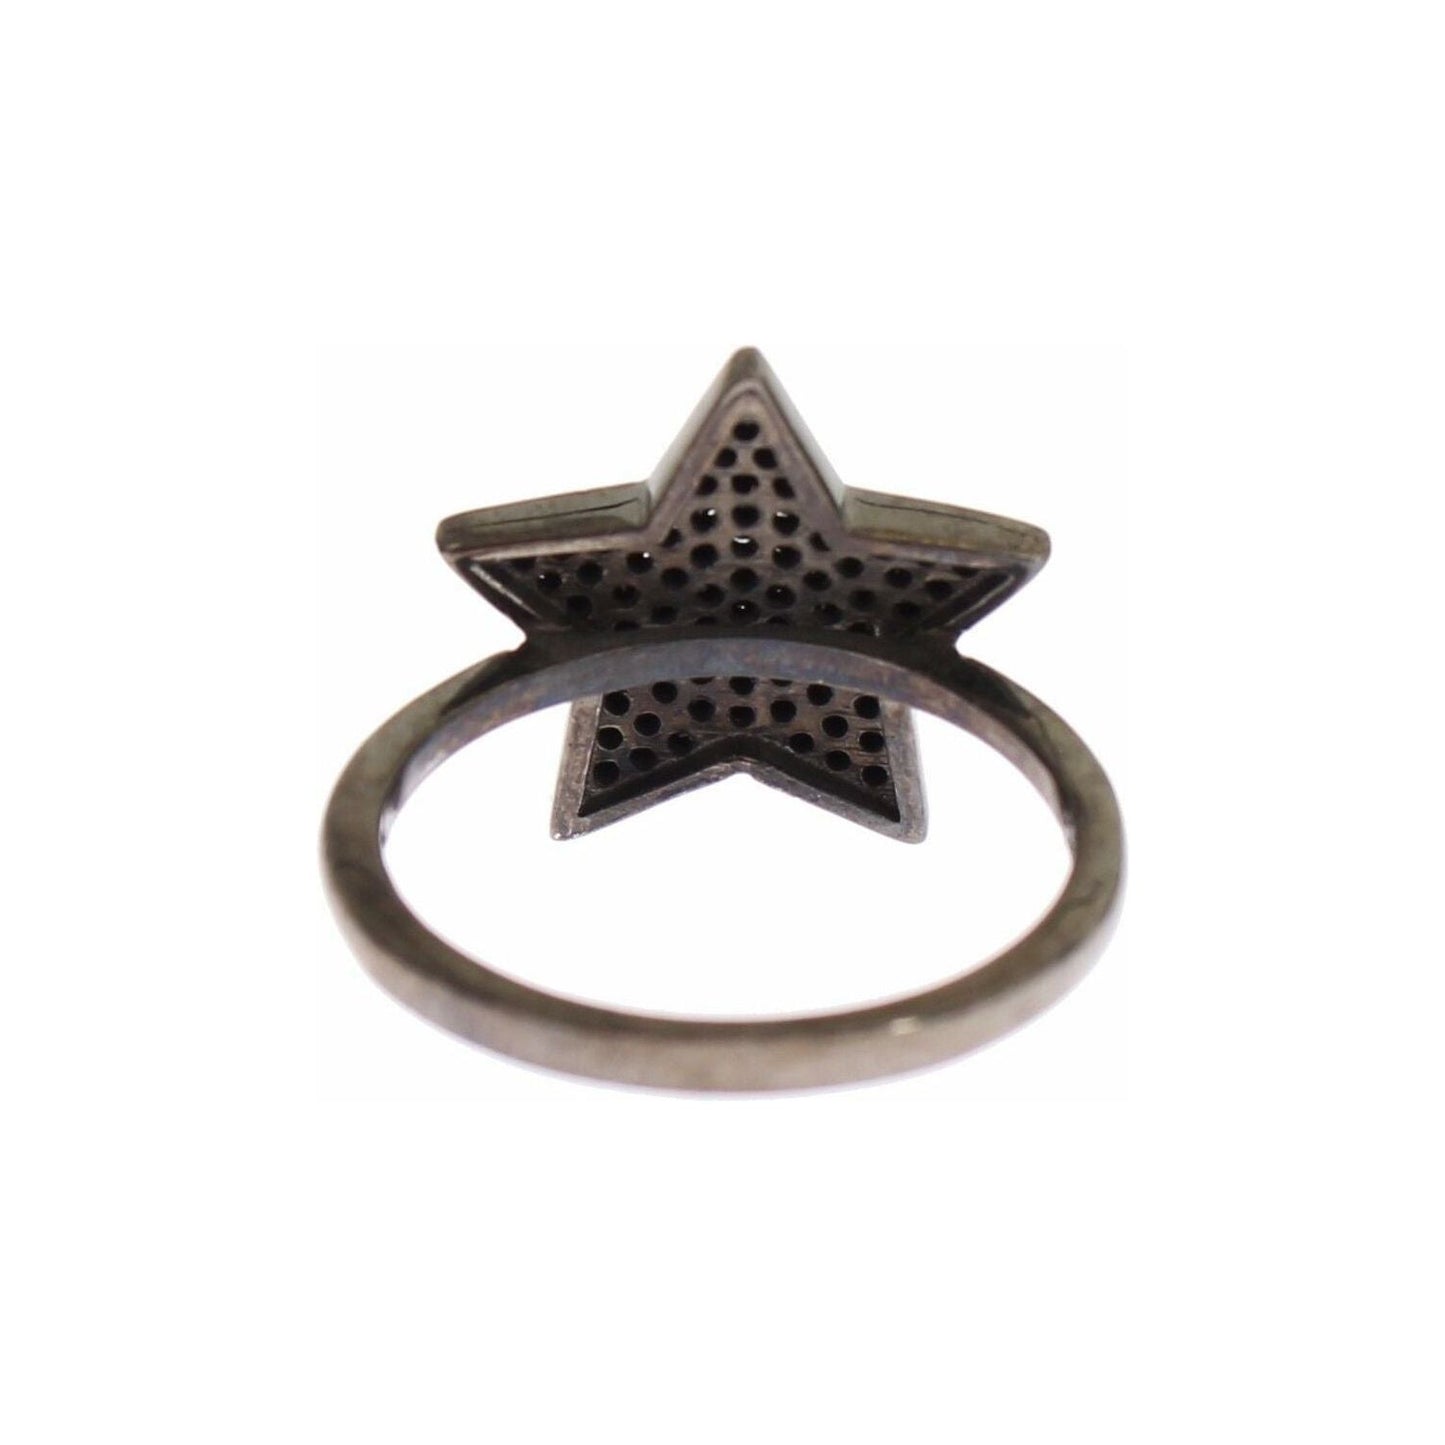 Nialaya Exquisite Sterling Silver CZ Crystal Ring Ring black-cz-star-925-silver-womens-ring s-l1600-84-1-9966c307-341.jpg